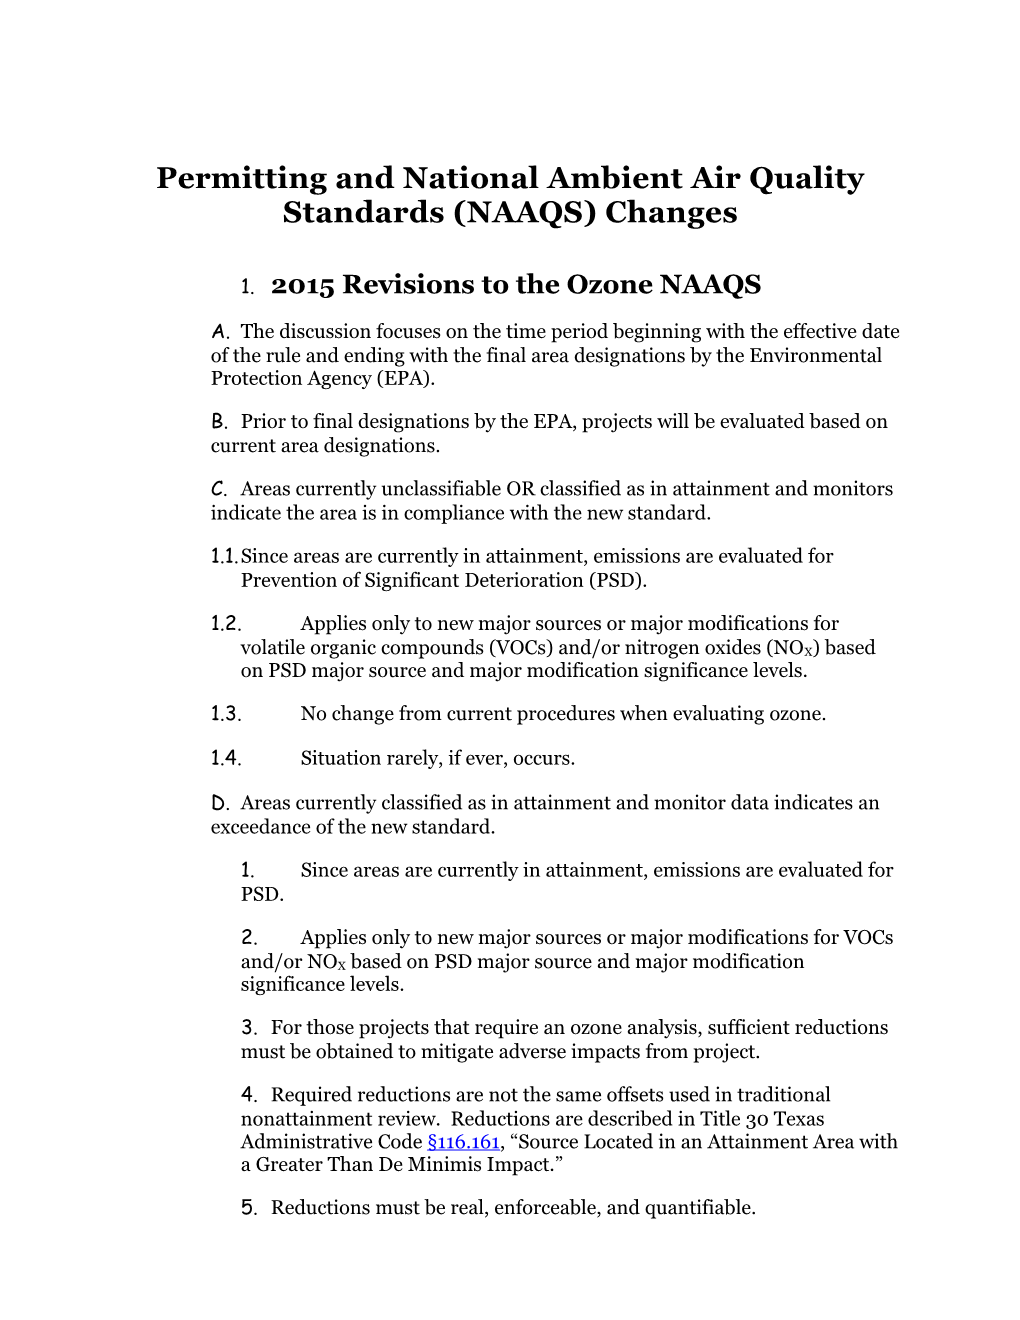 National Ambient Air Quality Standards Changes